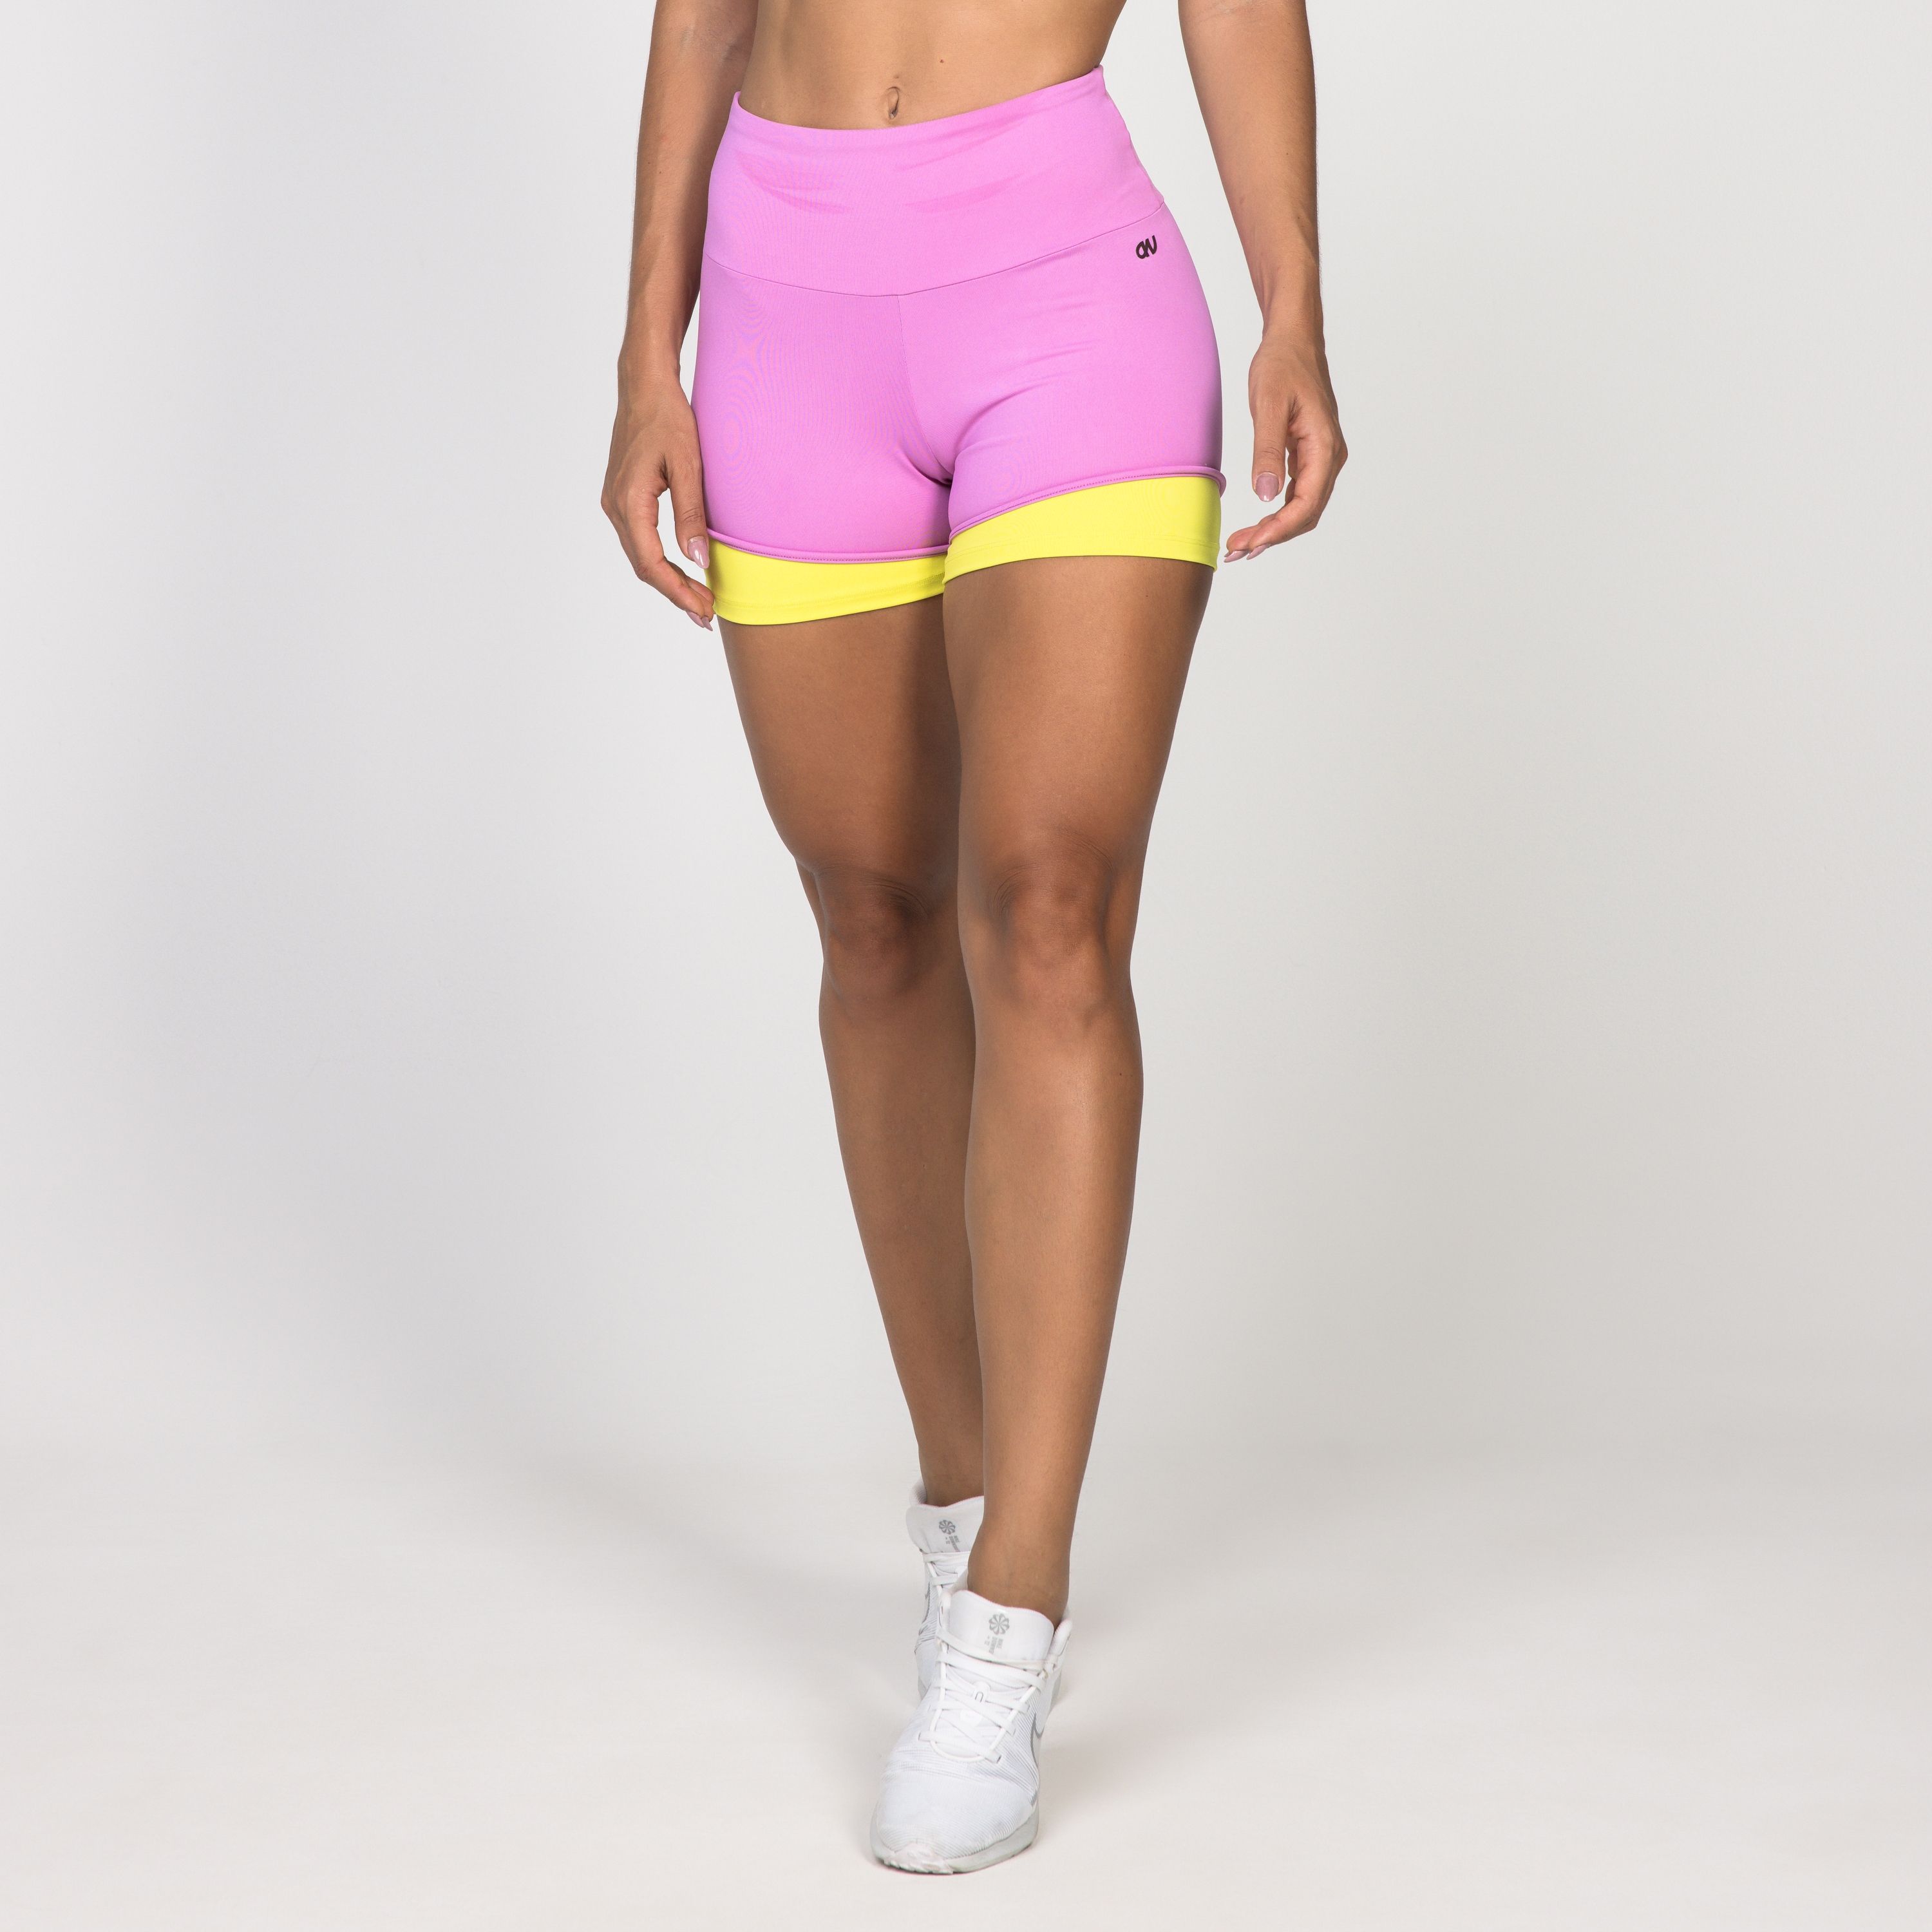 Girls Booty Shorts in Neon Candy